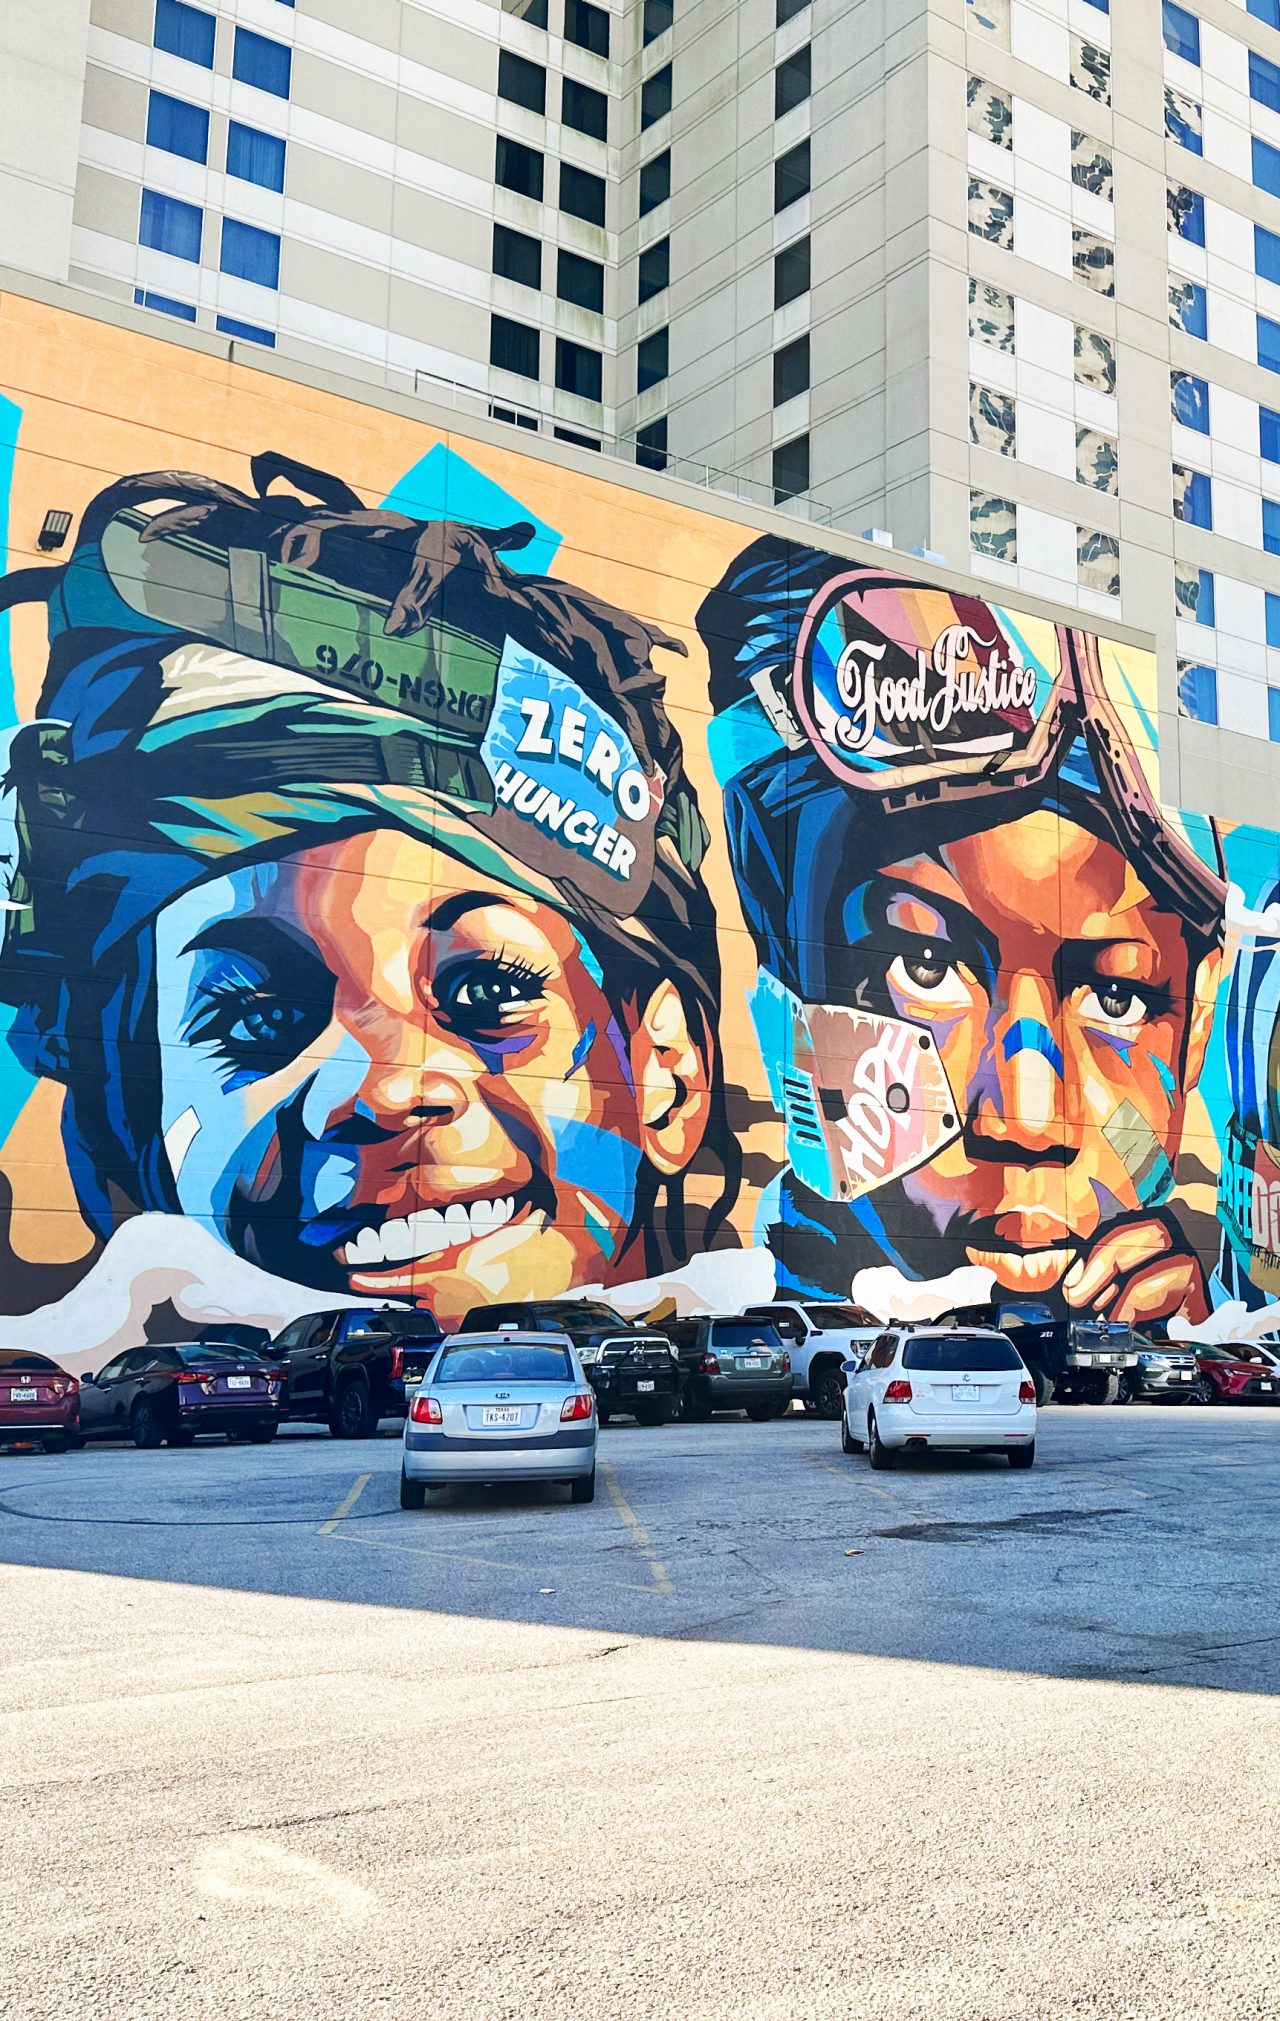 A mural on a city wall depicts a closeup image of four smiling Black children.